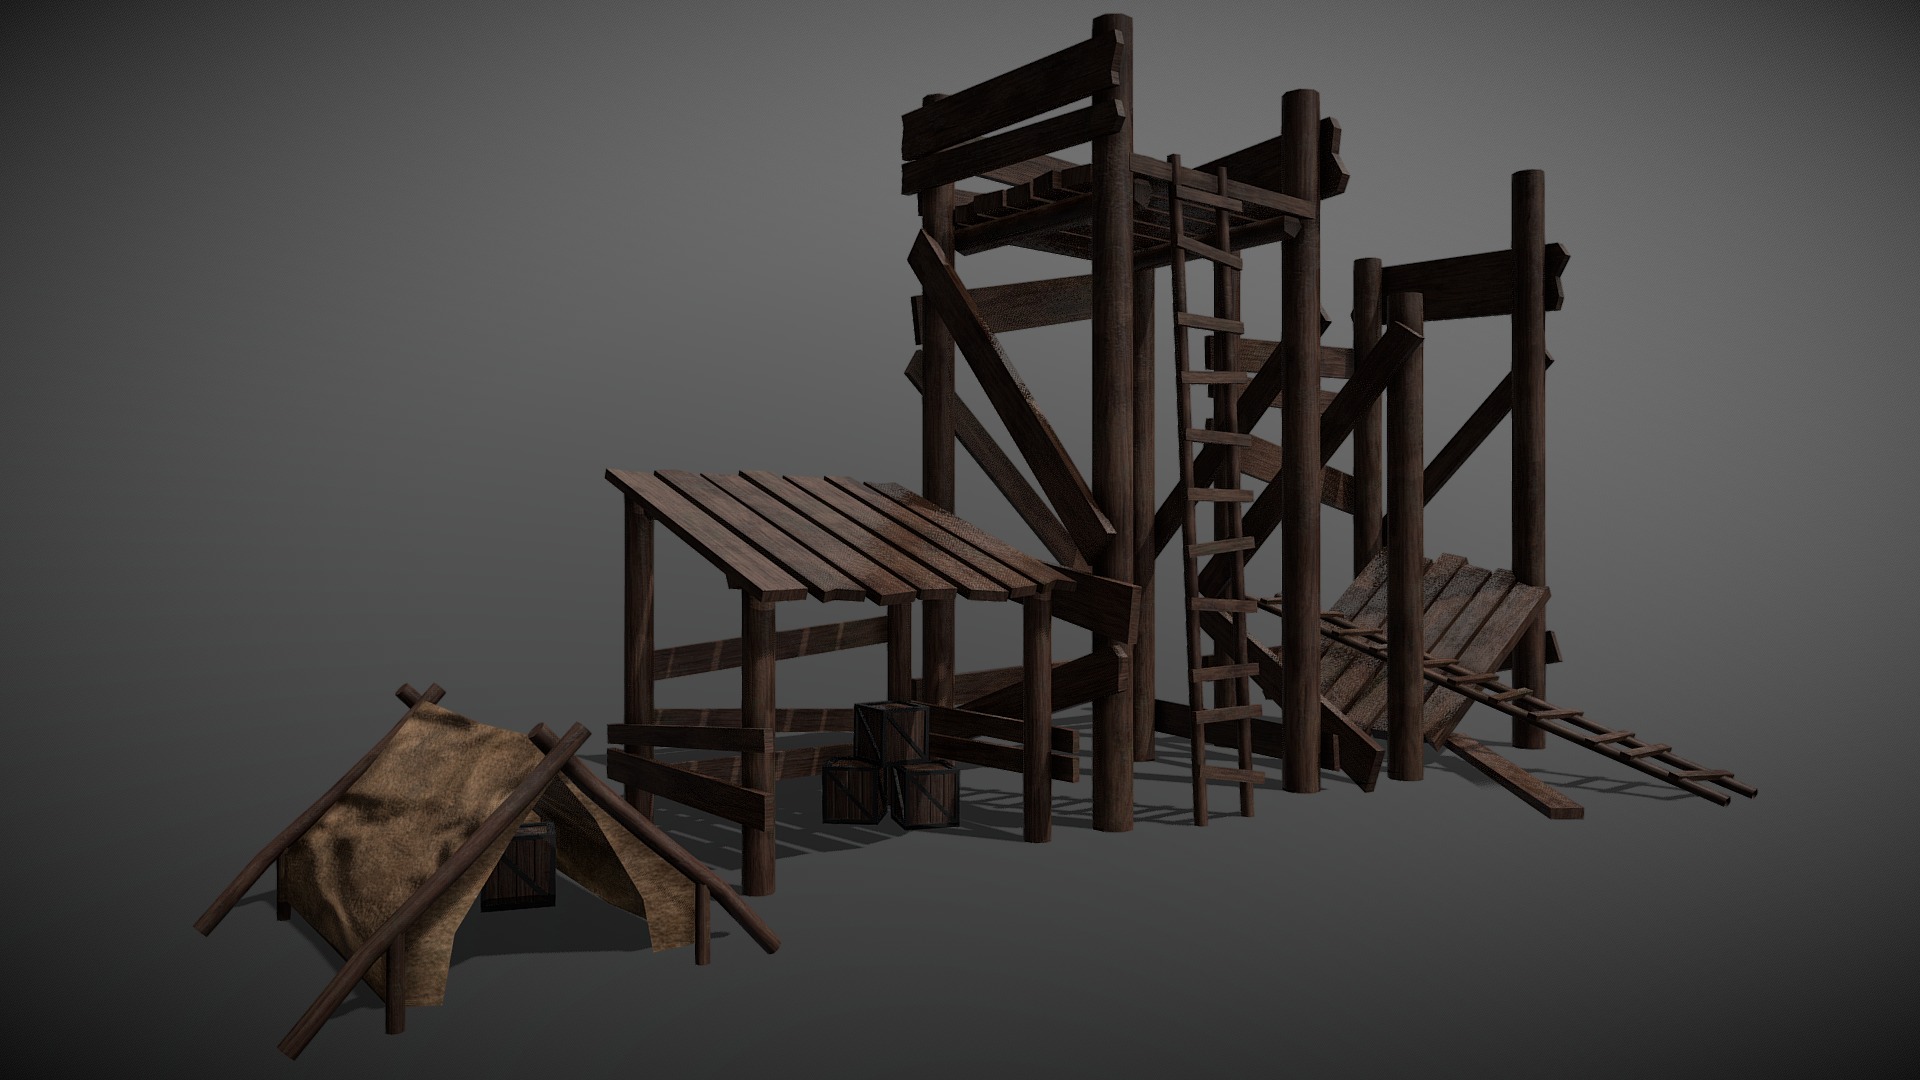 Four wooden environment assets to be used in any context, all created low-poly with a single UVW unwrap for the PBR material 3d model